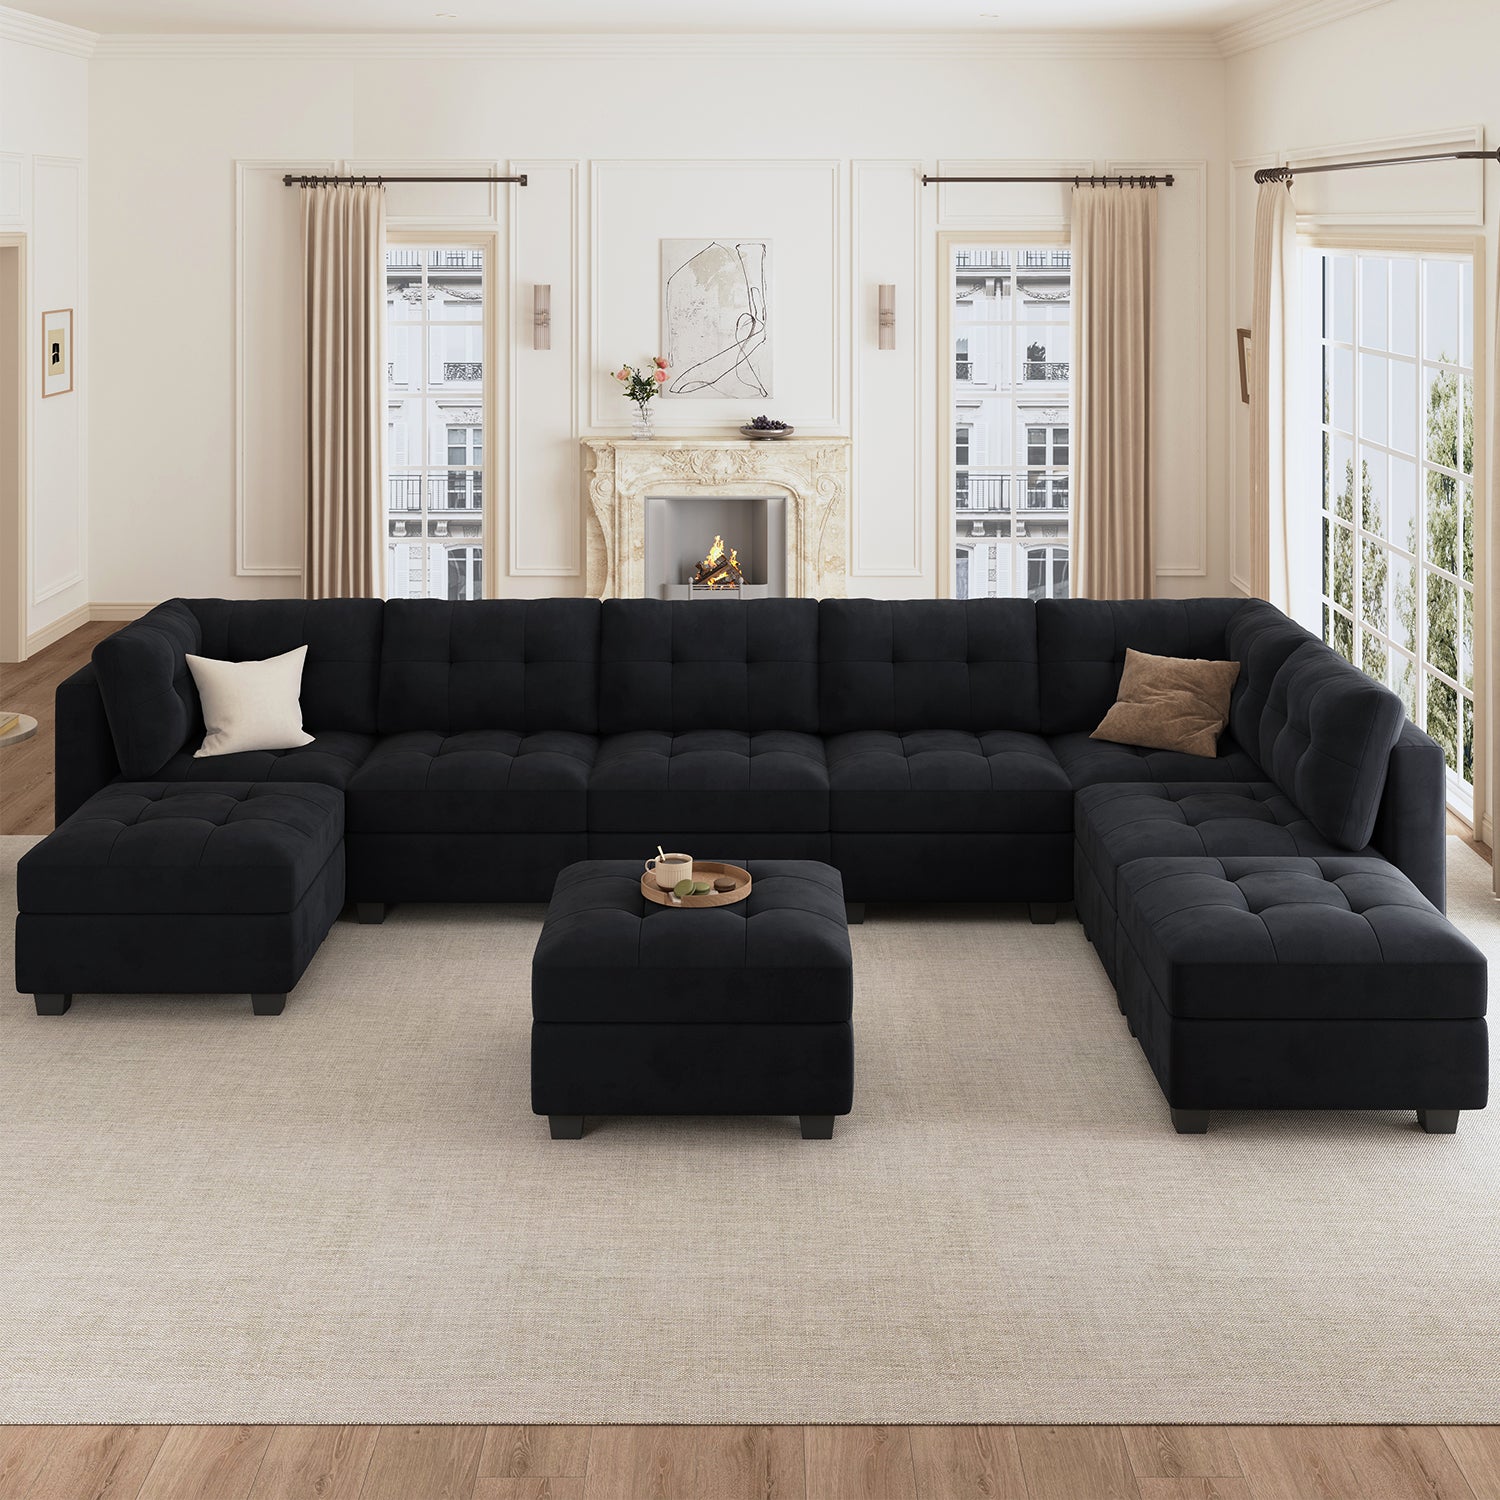 HONBAY Velvet Tufted 8-Seat Modular Sofa with Storage & Convertible Chaises